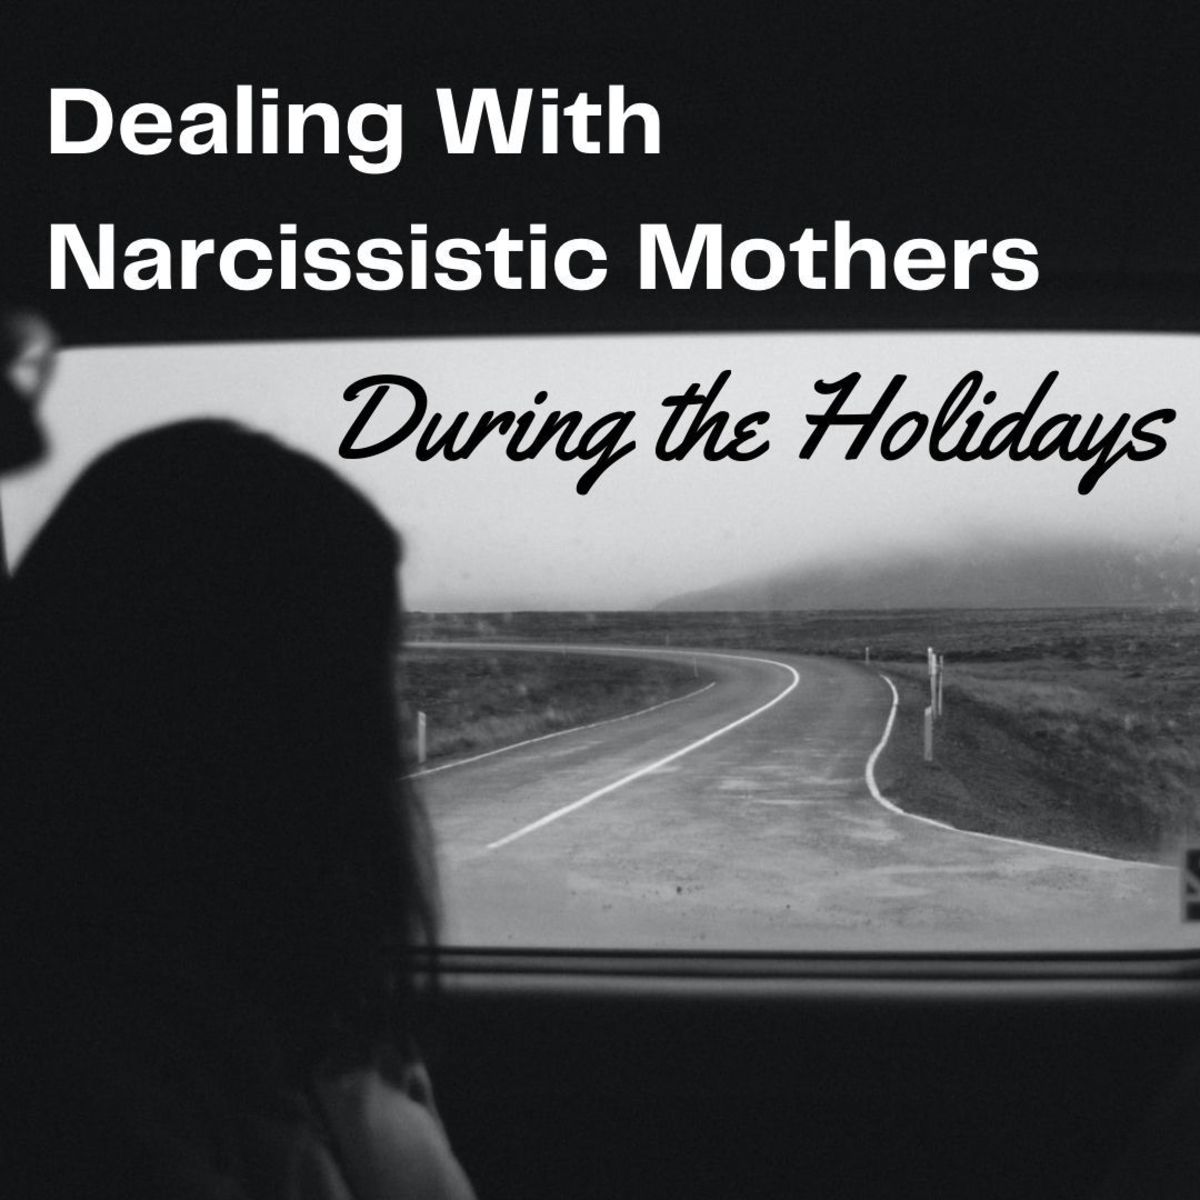 The holiday season is supposed to be a time filled with joy and laughter, but having a narcissistic mother can make it difficult.